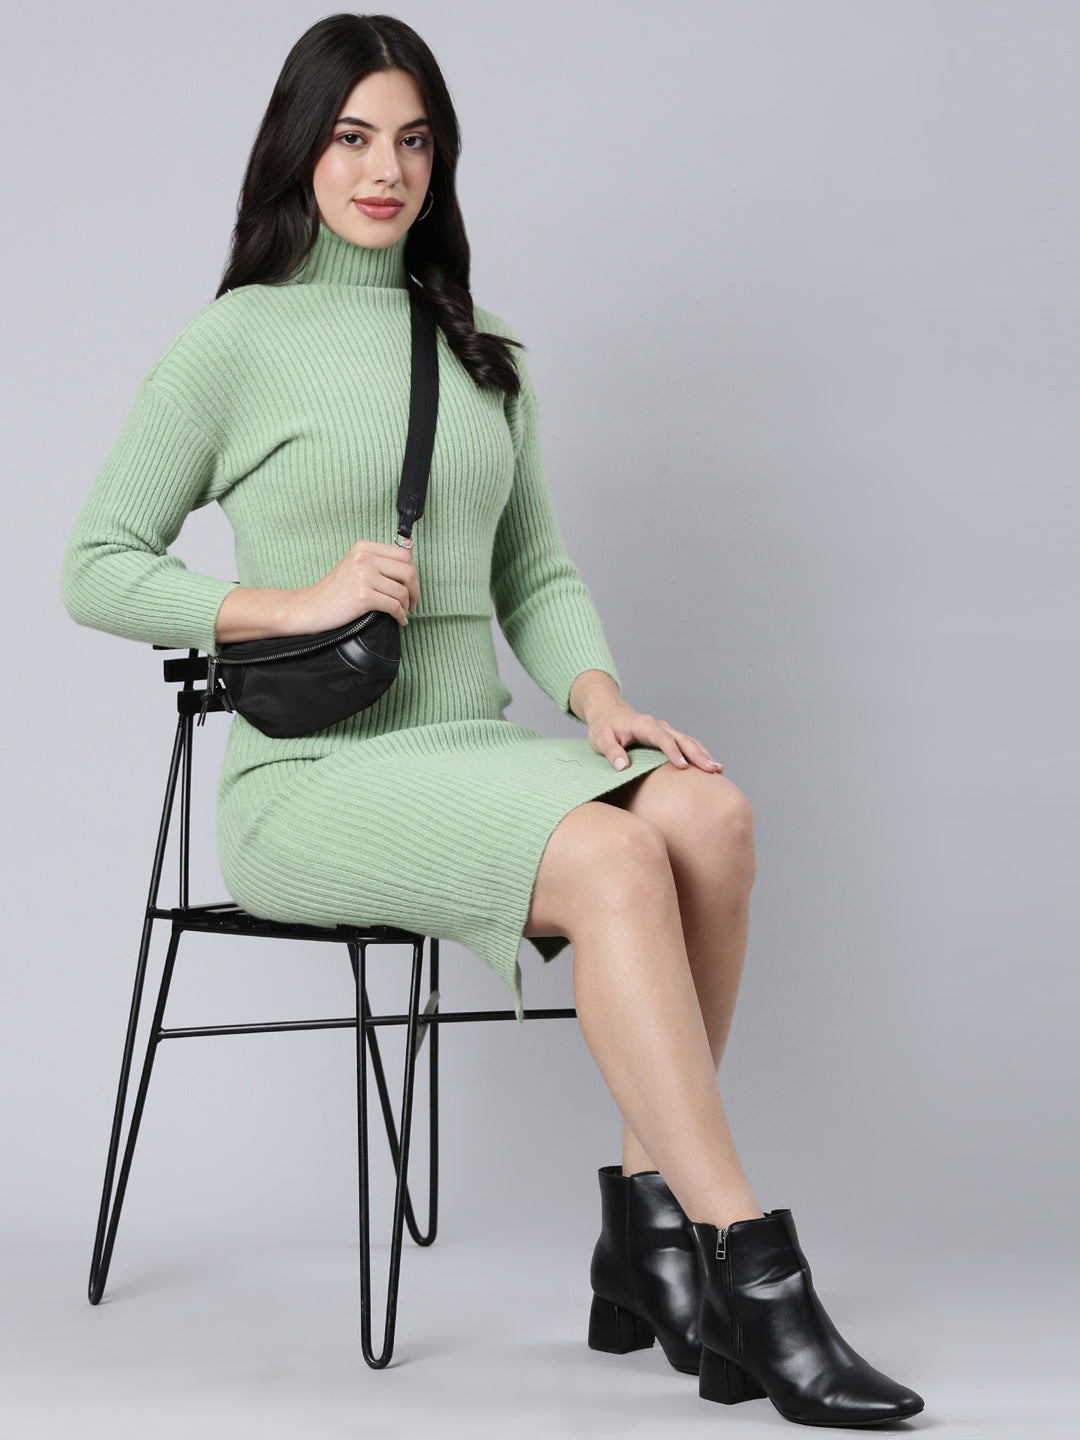 Women Self Design Green Bodycon Dress Comes with Top